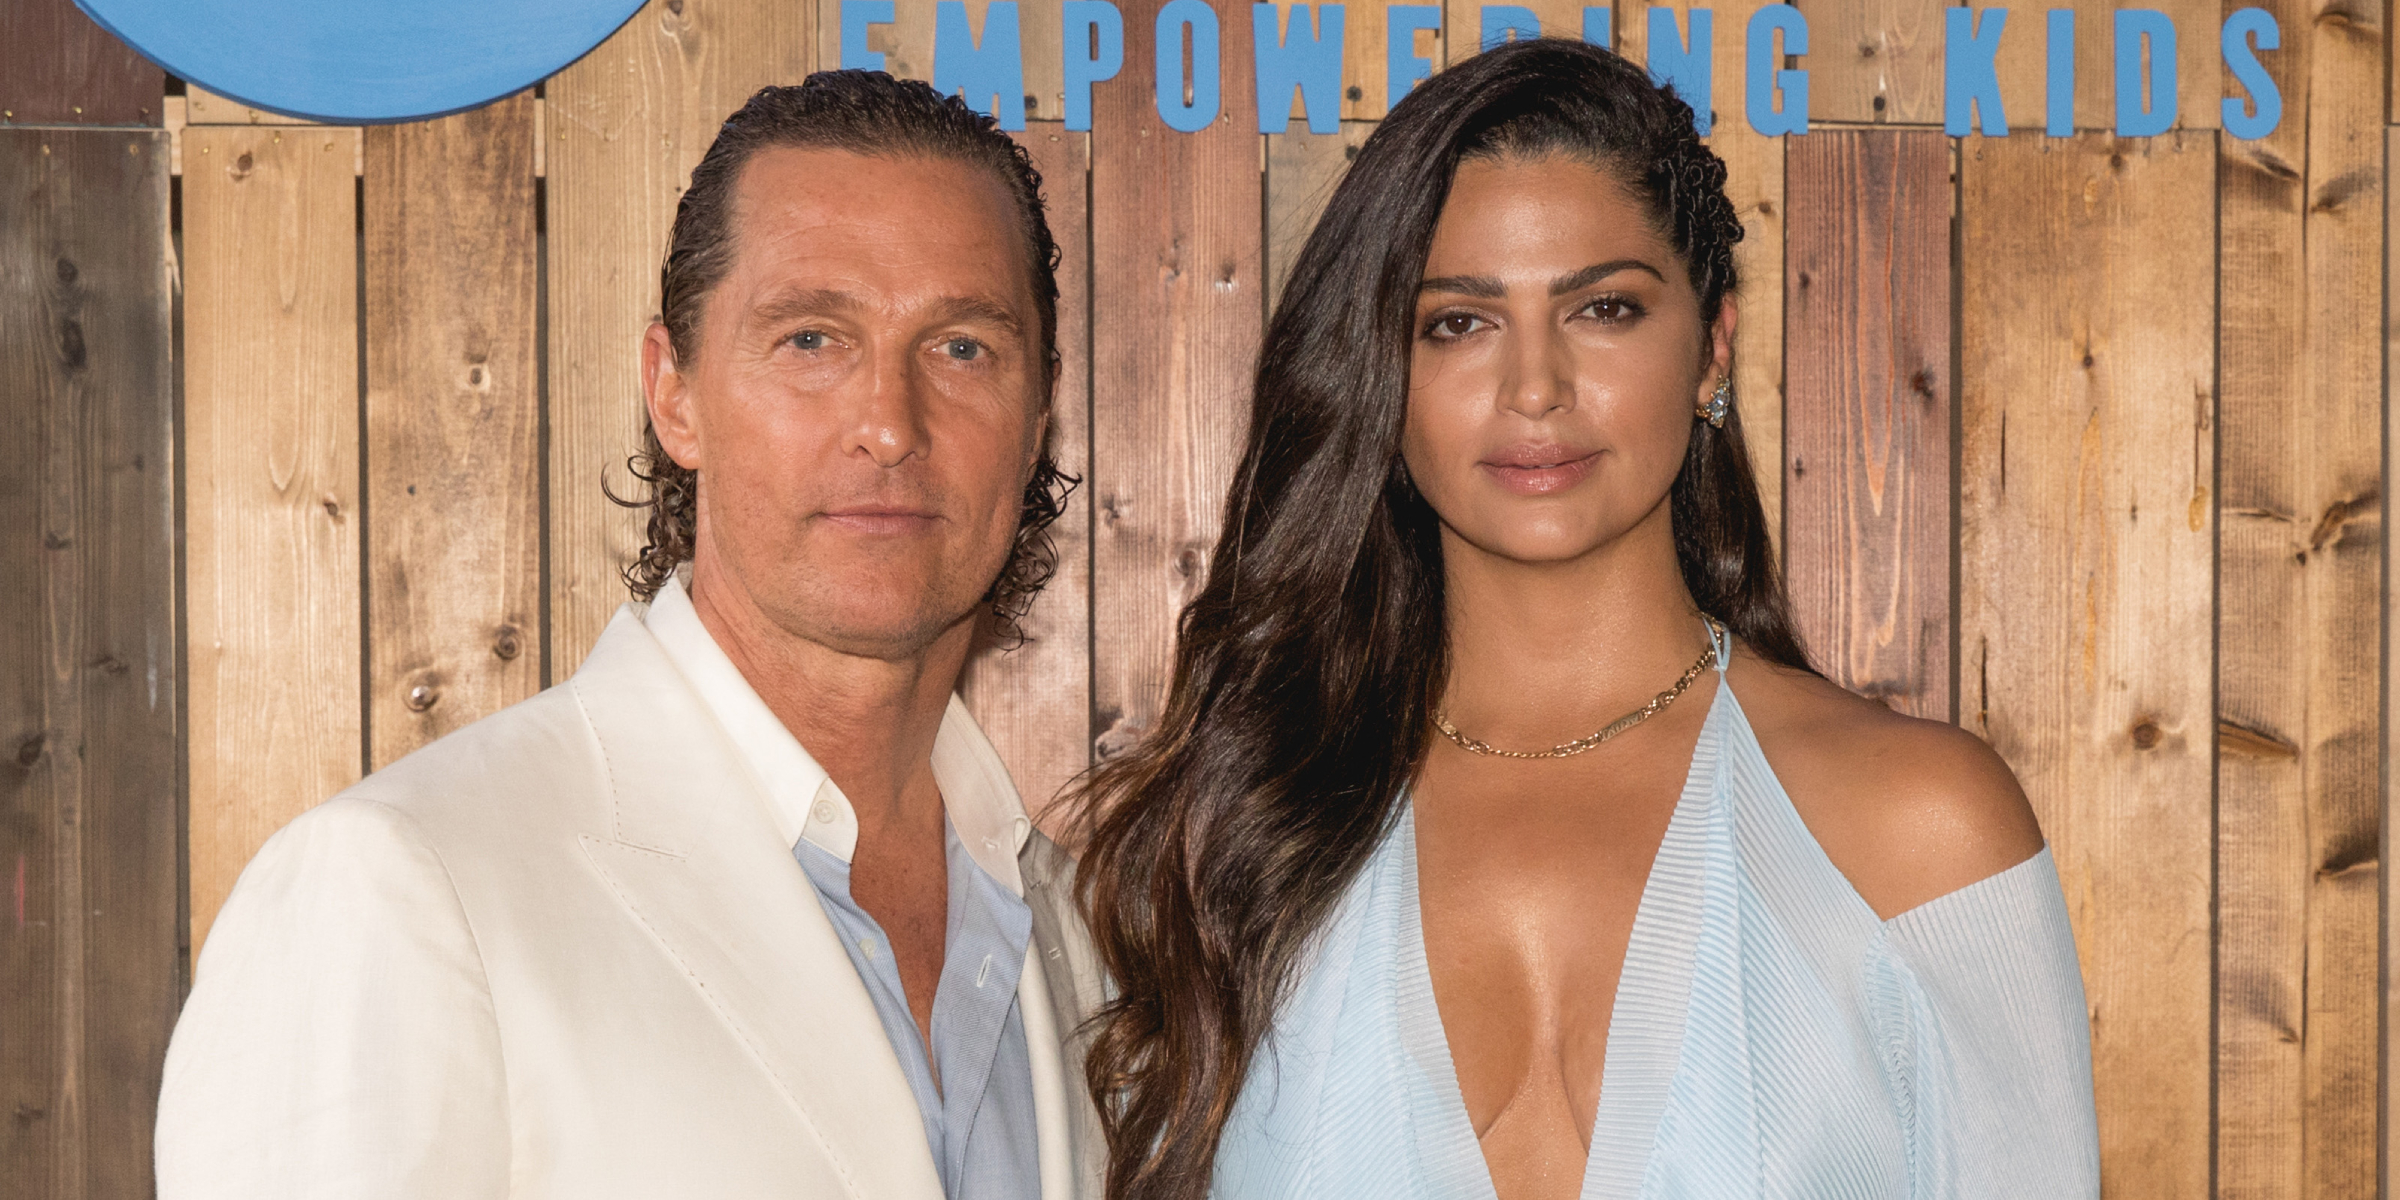 Matthew McConaughey and Camila Alves | Source: Getty Images